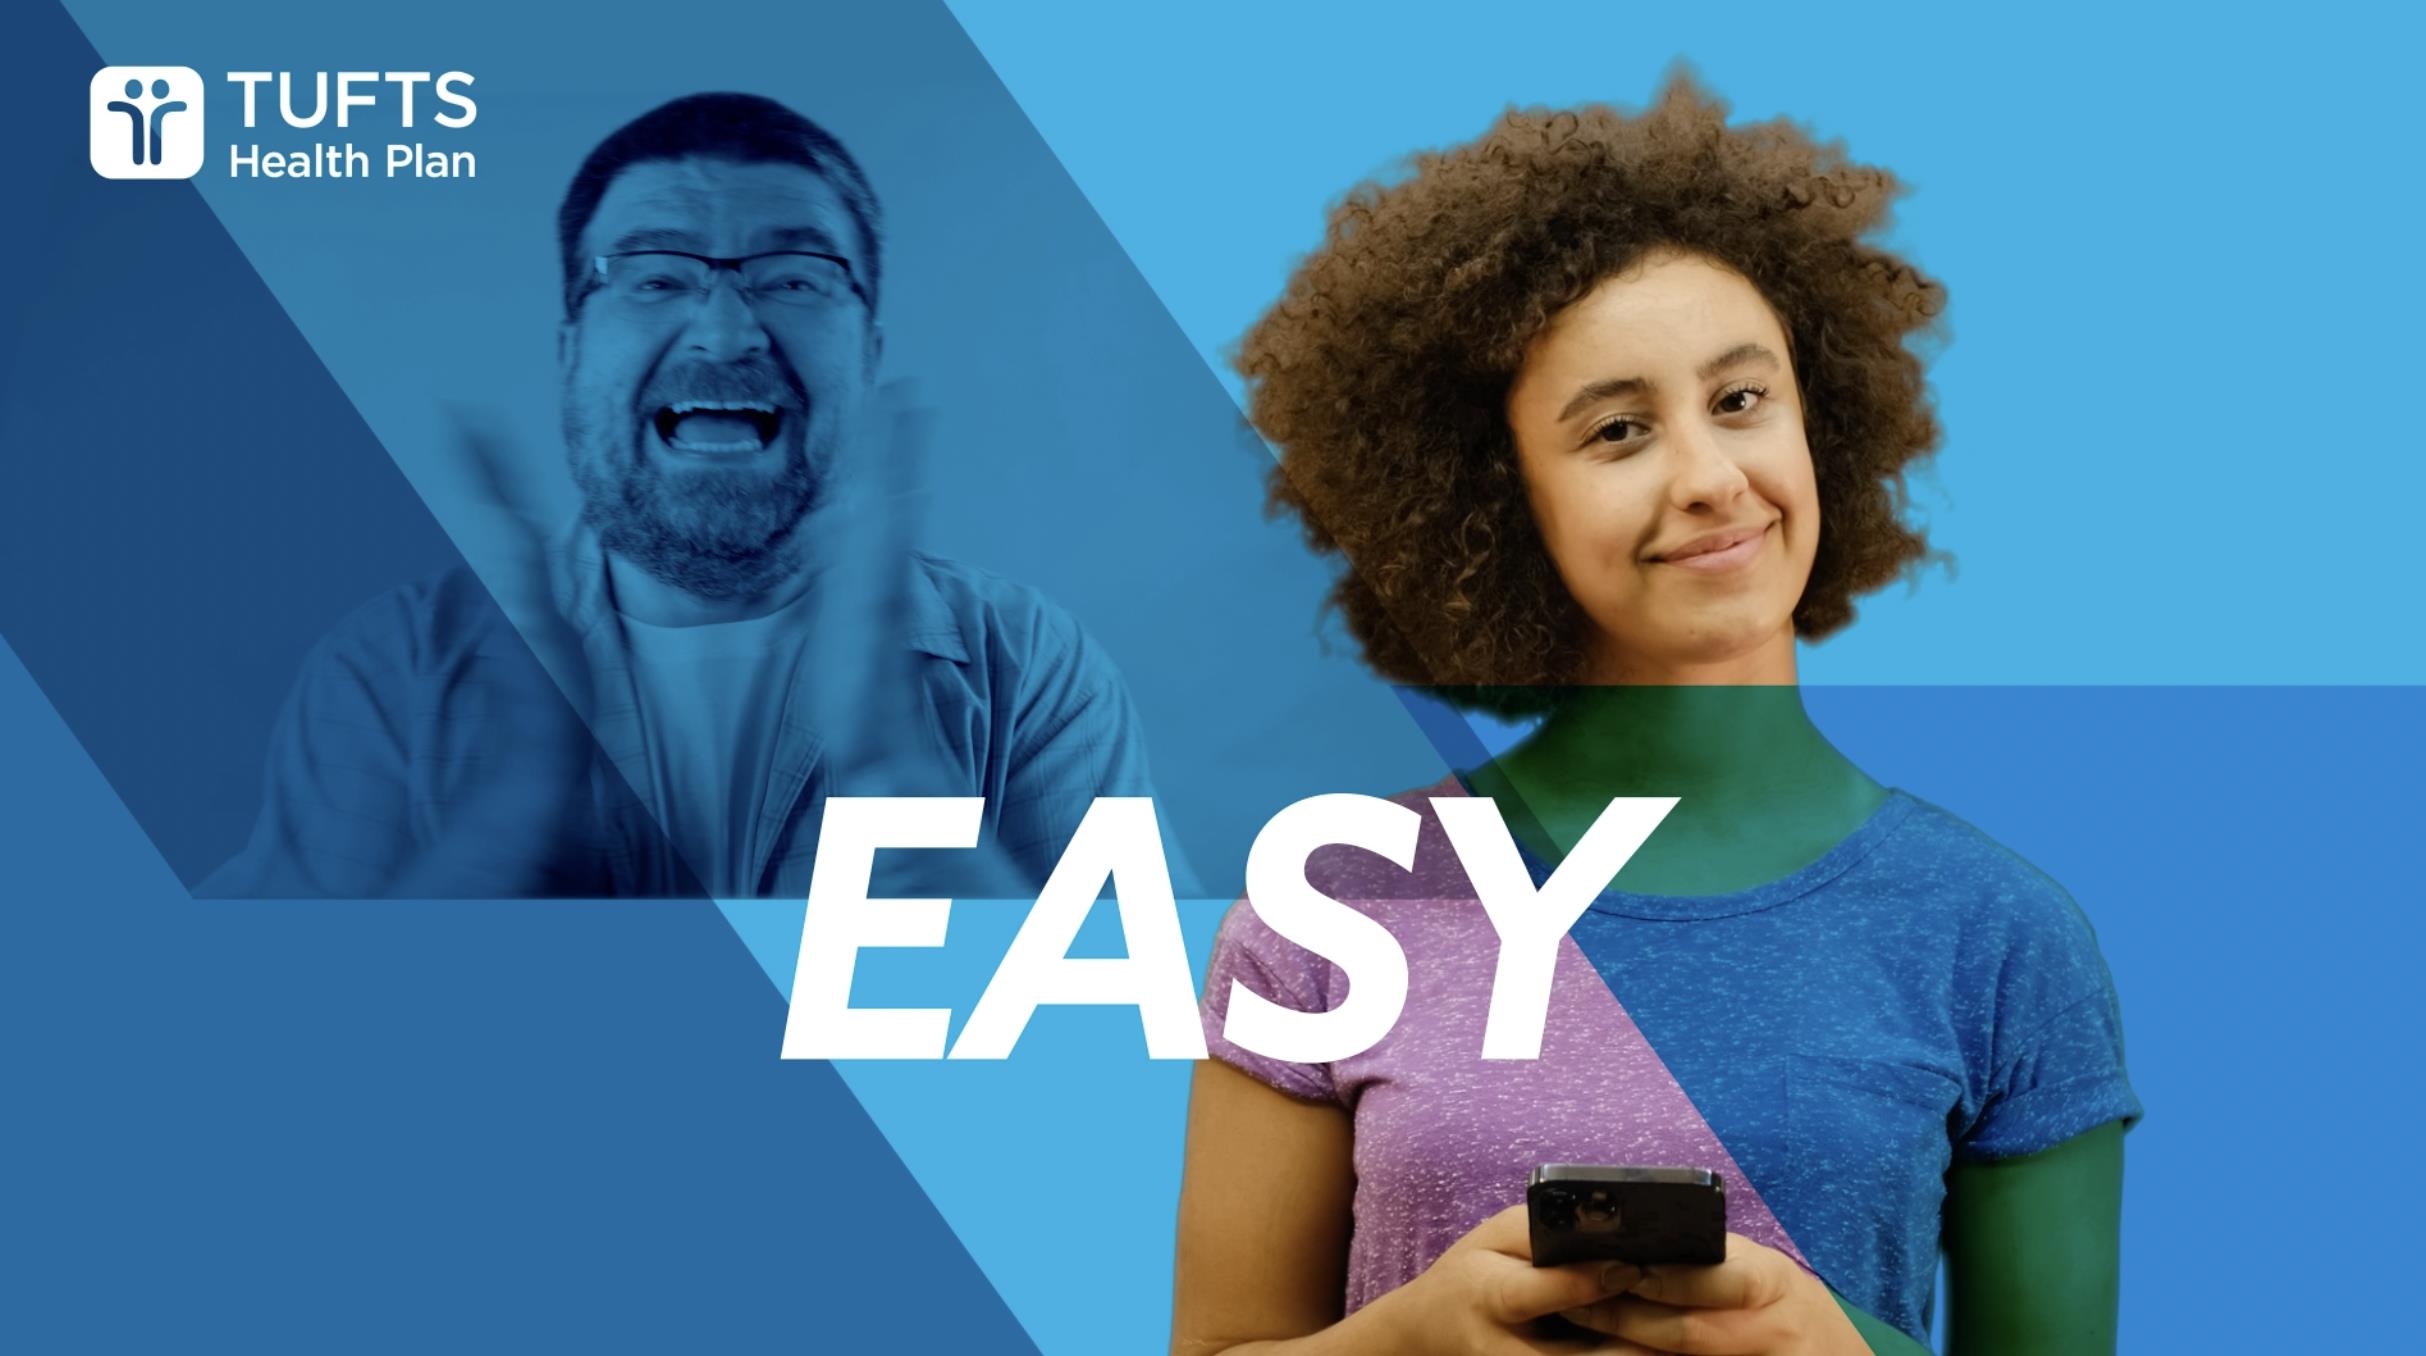 Tufts Health Direct - "Easy"